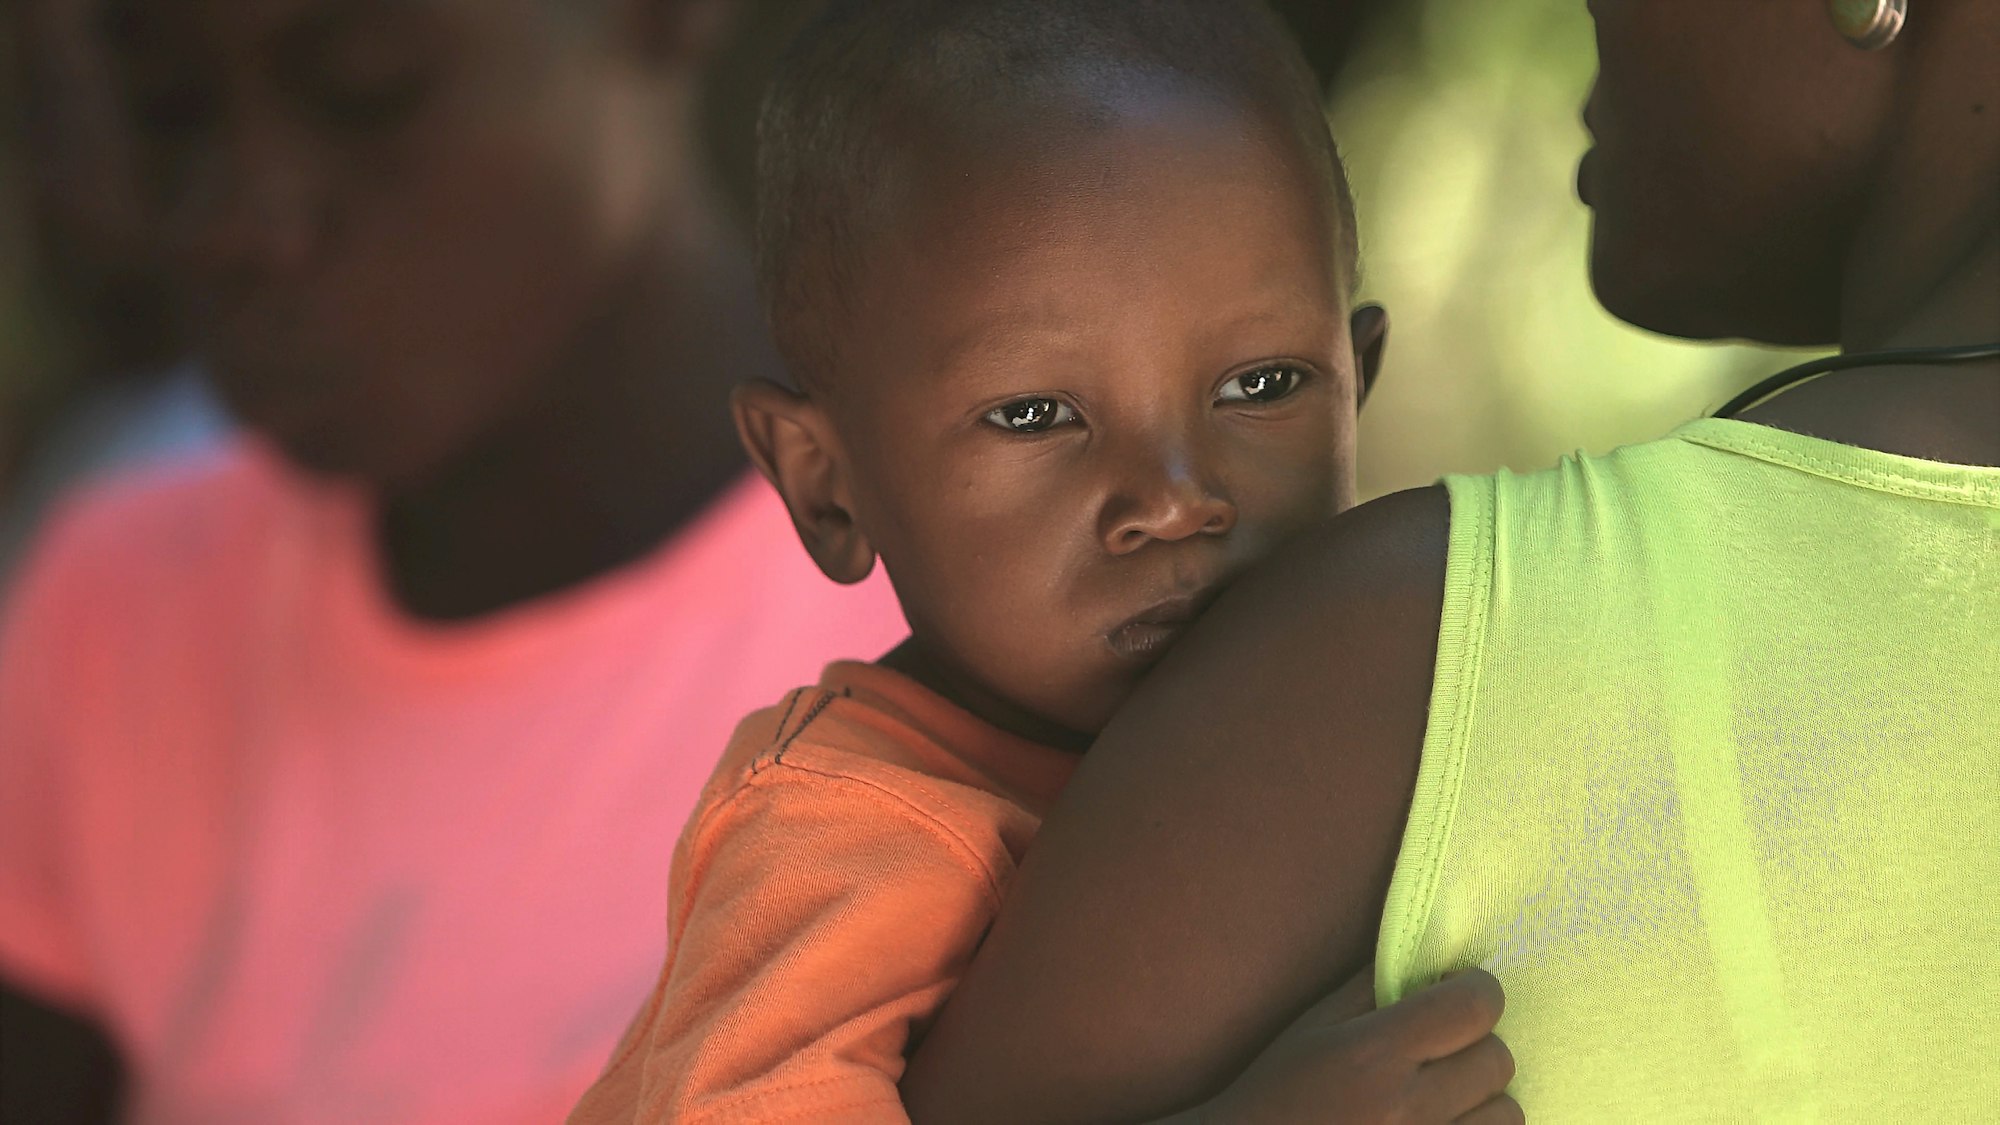 A baby being carried by the mother in Haiti